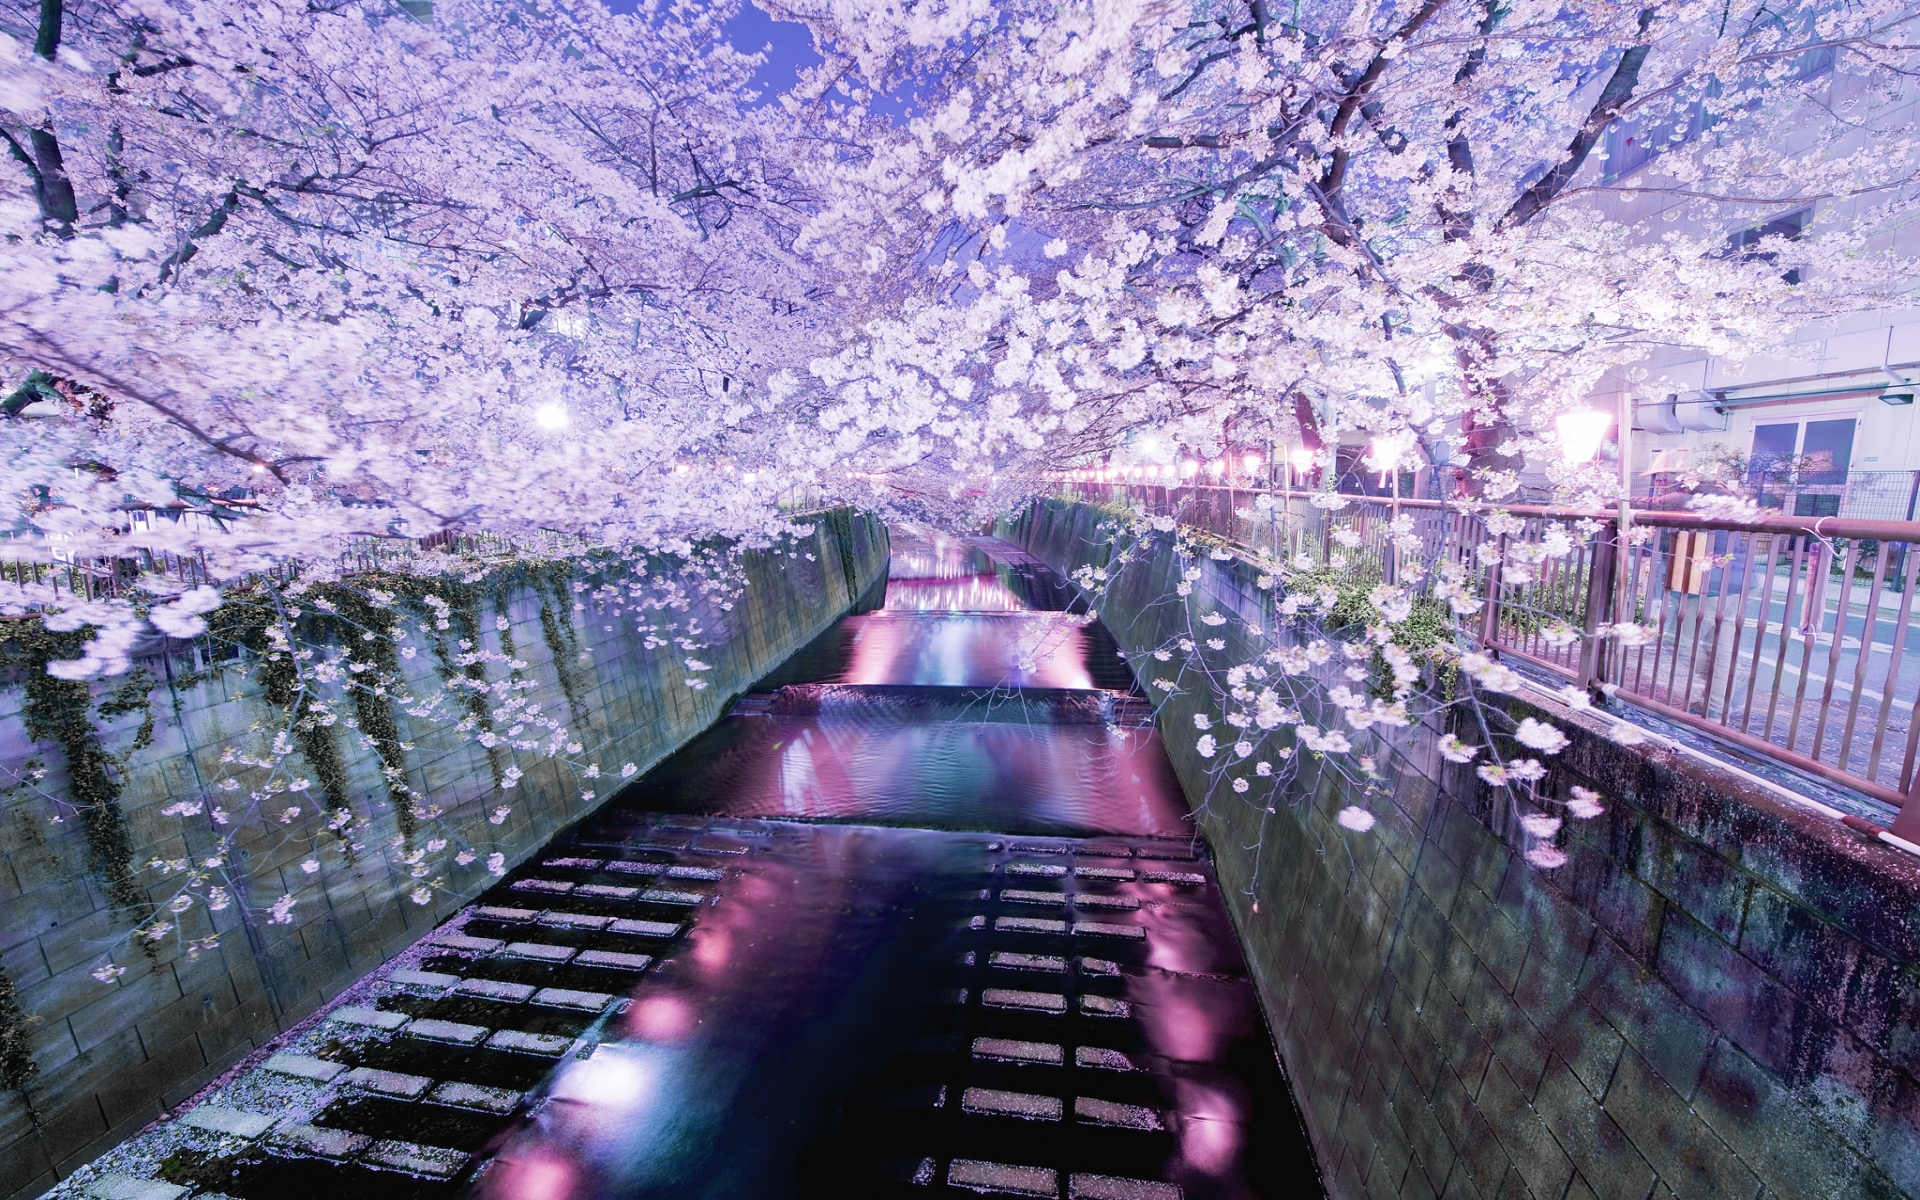 japan, Asian, Oriental, Canal, Water, Waterway, Waterfalls, Reflection, Color, Trees, Blossoms, Flowers, Night, Lights, Soft, Garden, Path, Sidewalk, Buildings, Purple, Shine, Photography, Hdr, Fence, Leaves Wallpaper